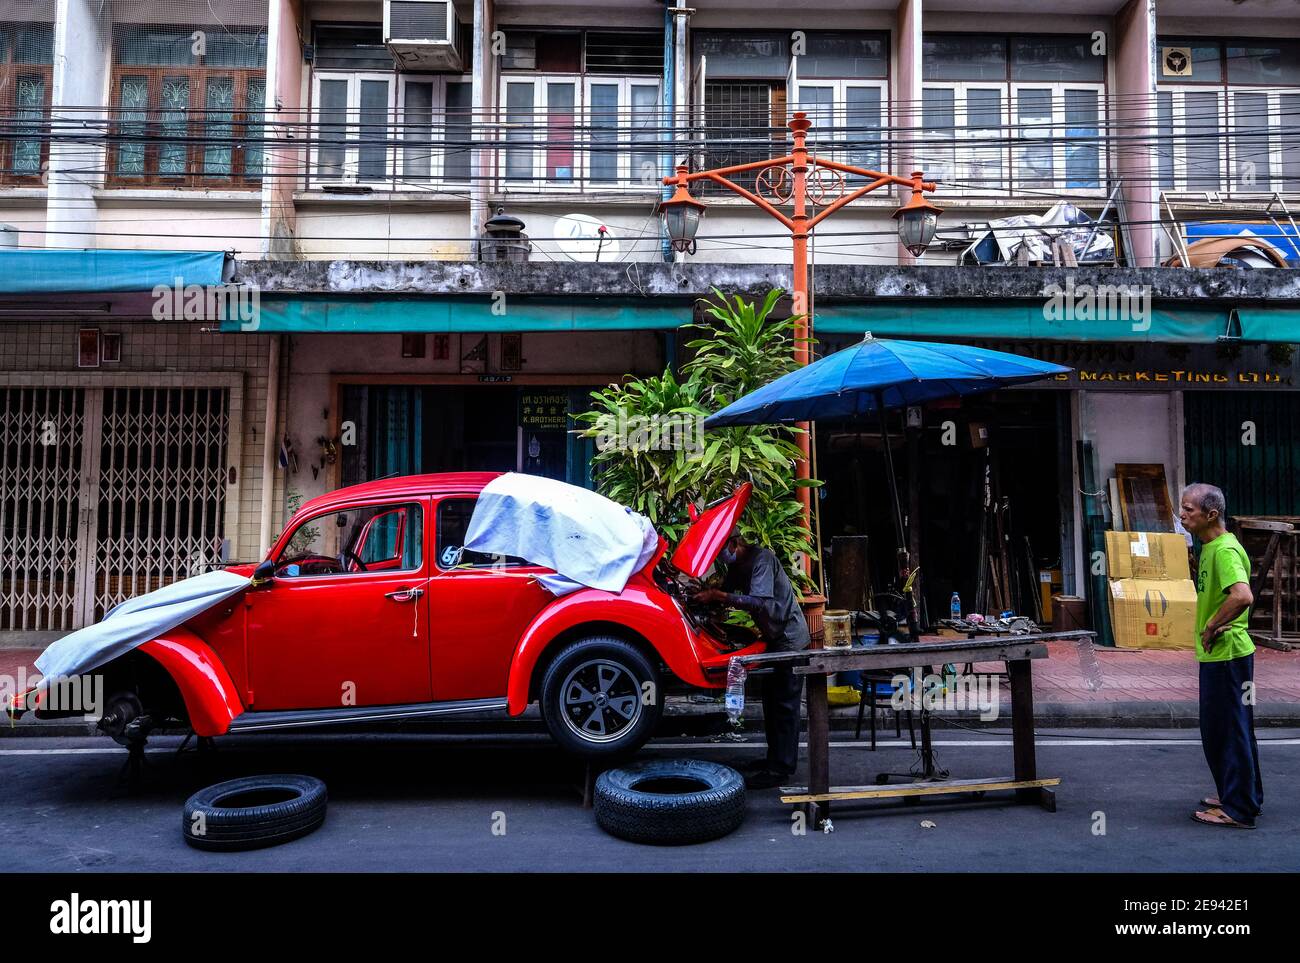 A man watches while a male car mechanic works on an old VW Beetle in a street in the Chinatown area of Bangkok, Thailand Stock Photo